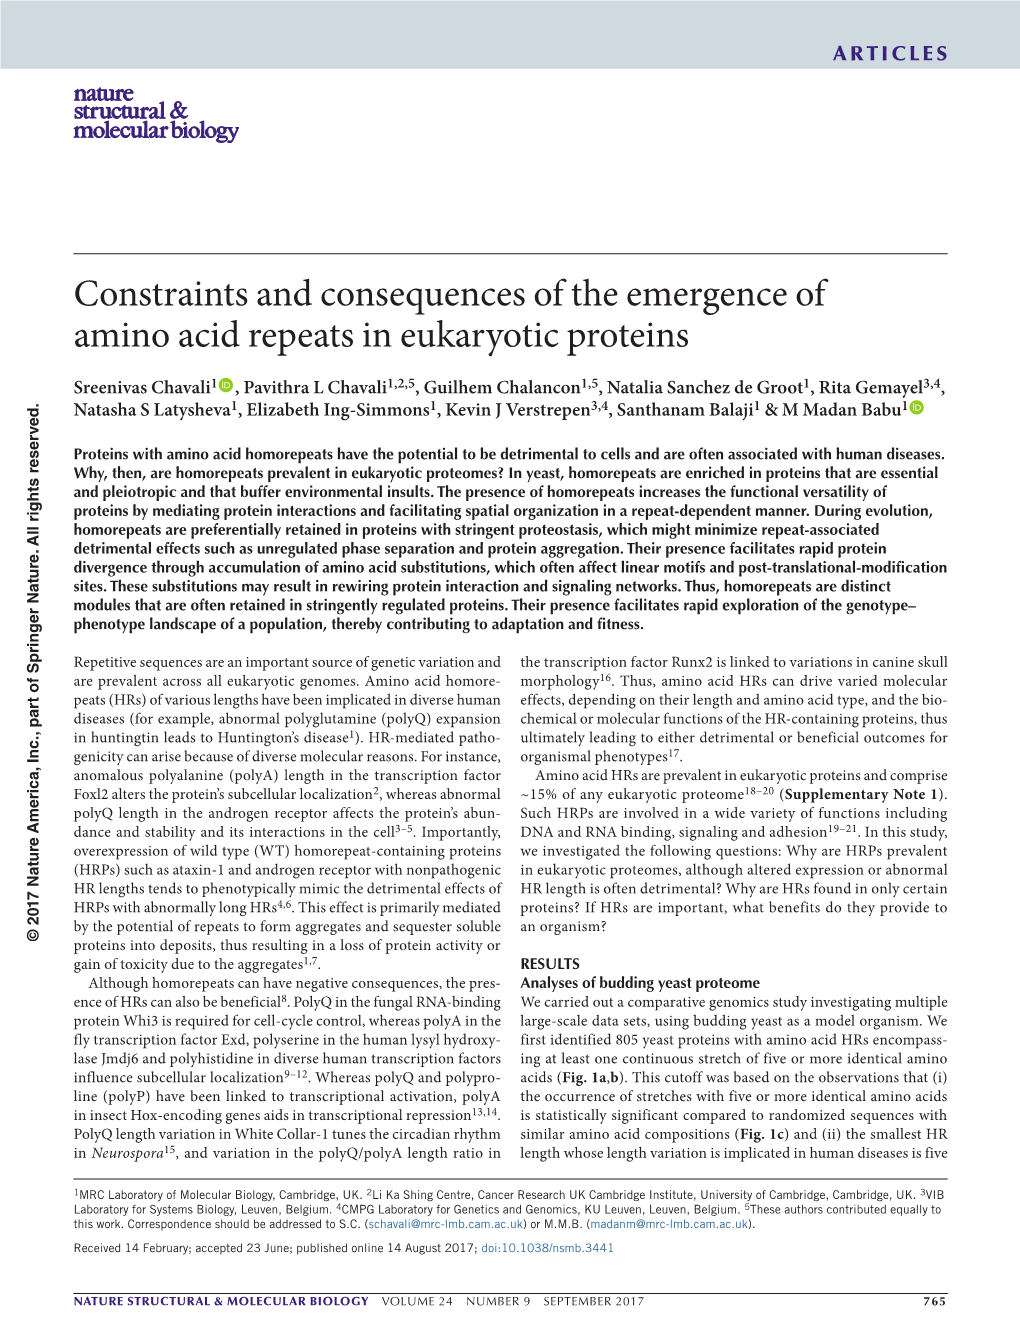 Constraints and Consequences of the Emergence of Amino Acid Repeats in Eukaryotic Proteins